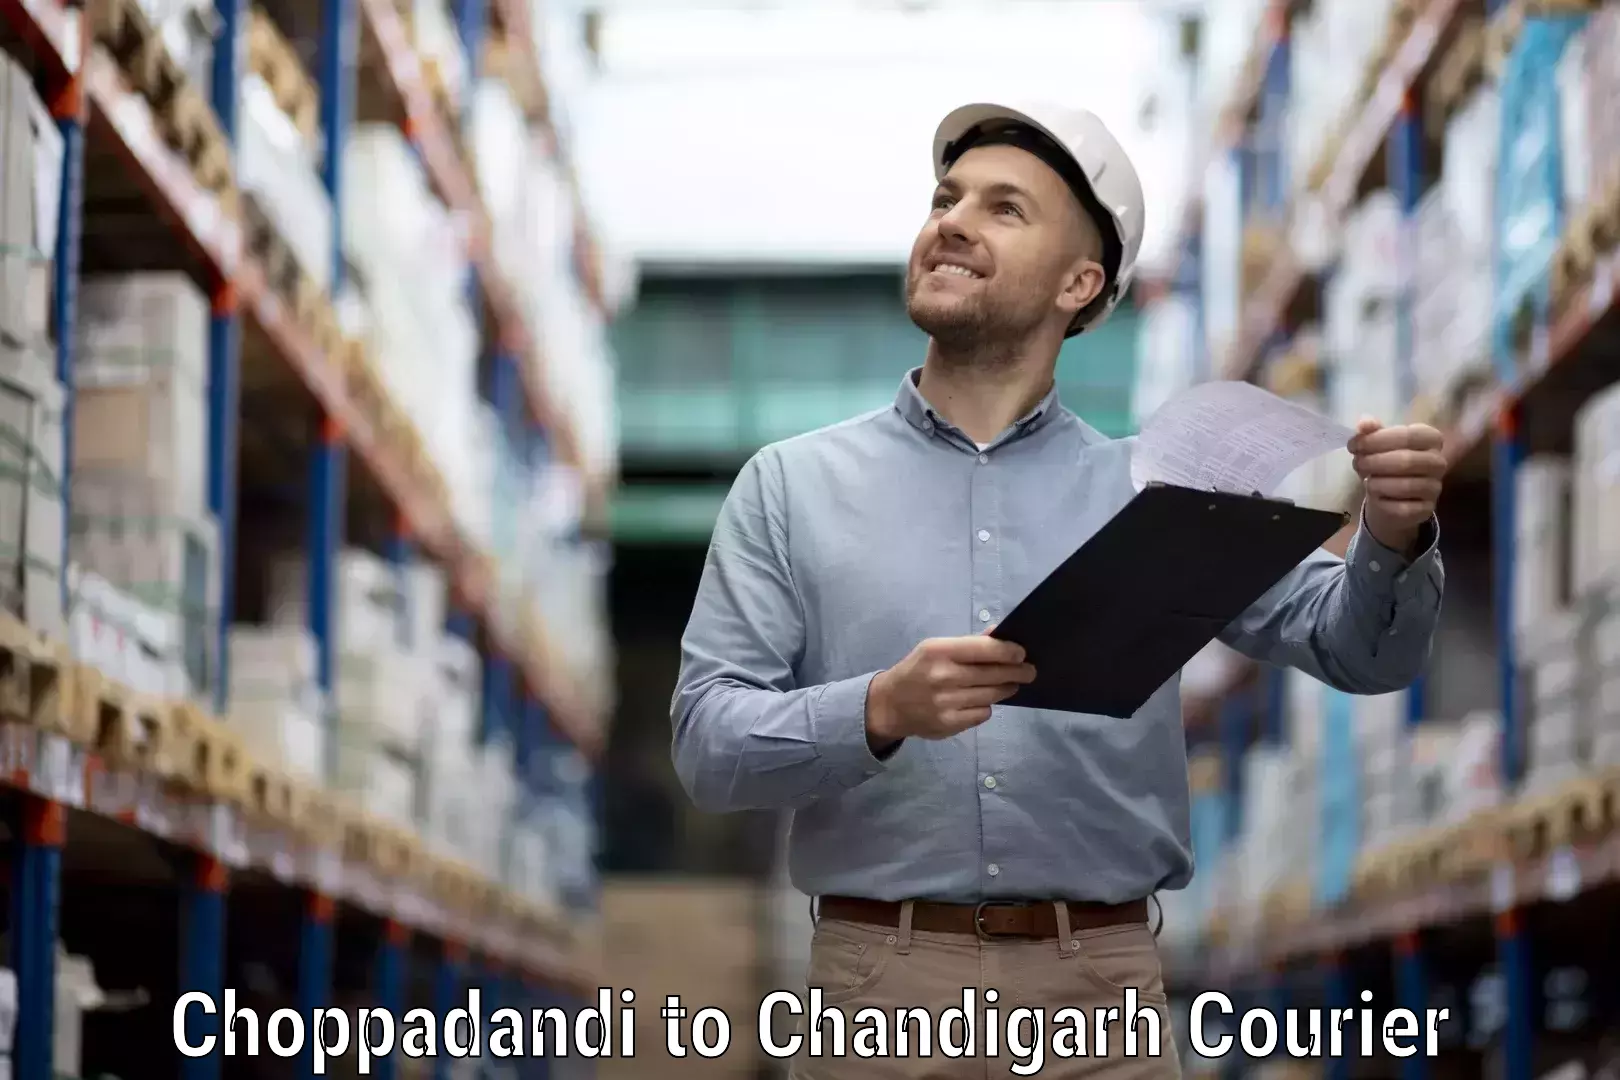 Medical delivery services Choppadandi to Chandigarh